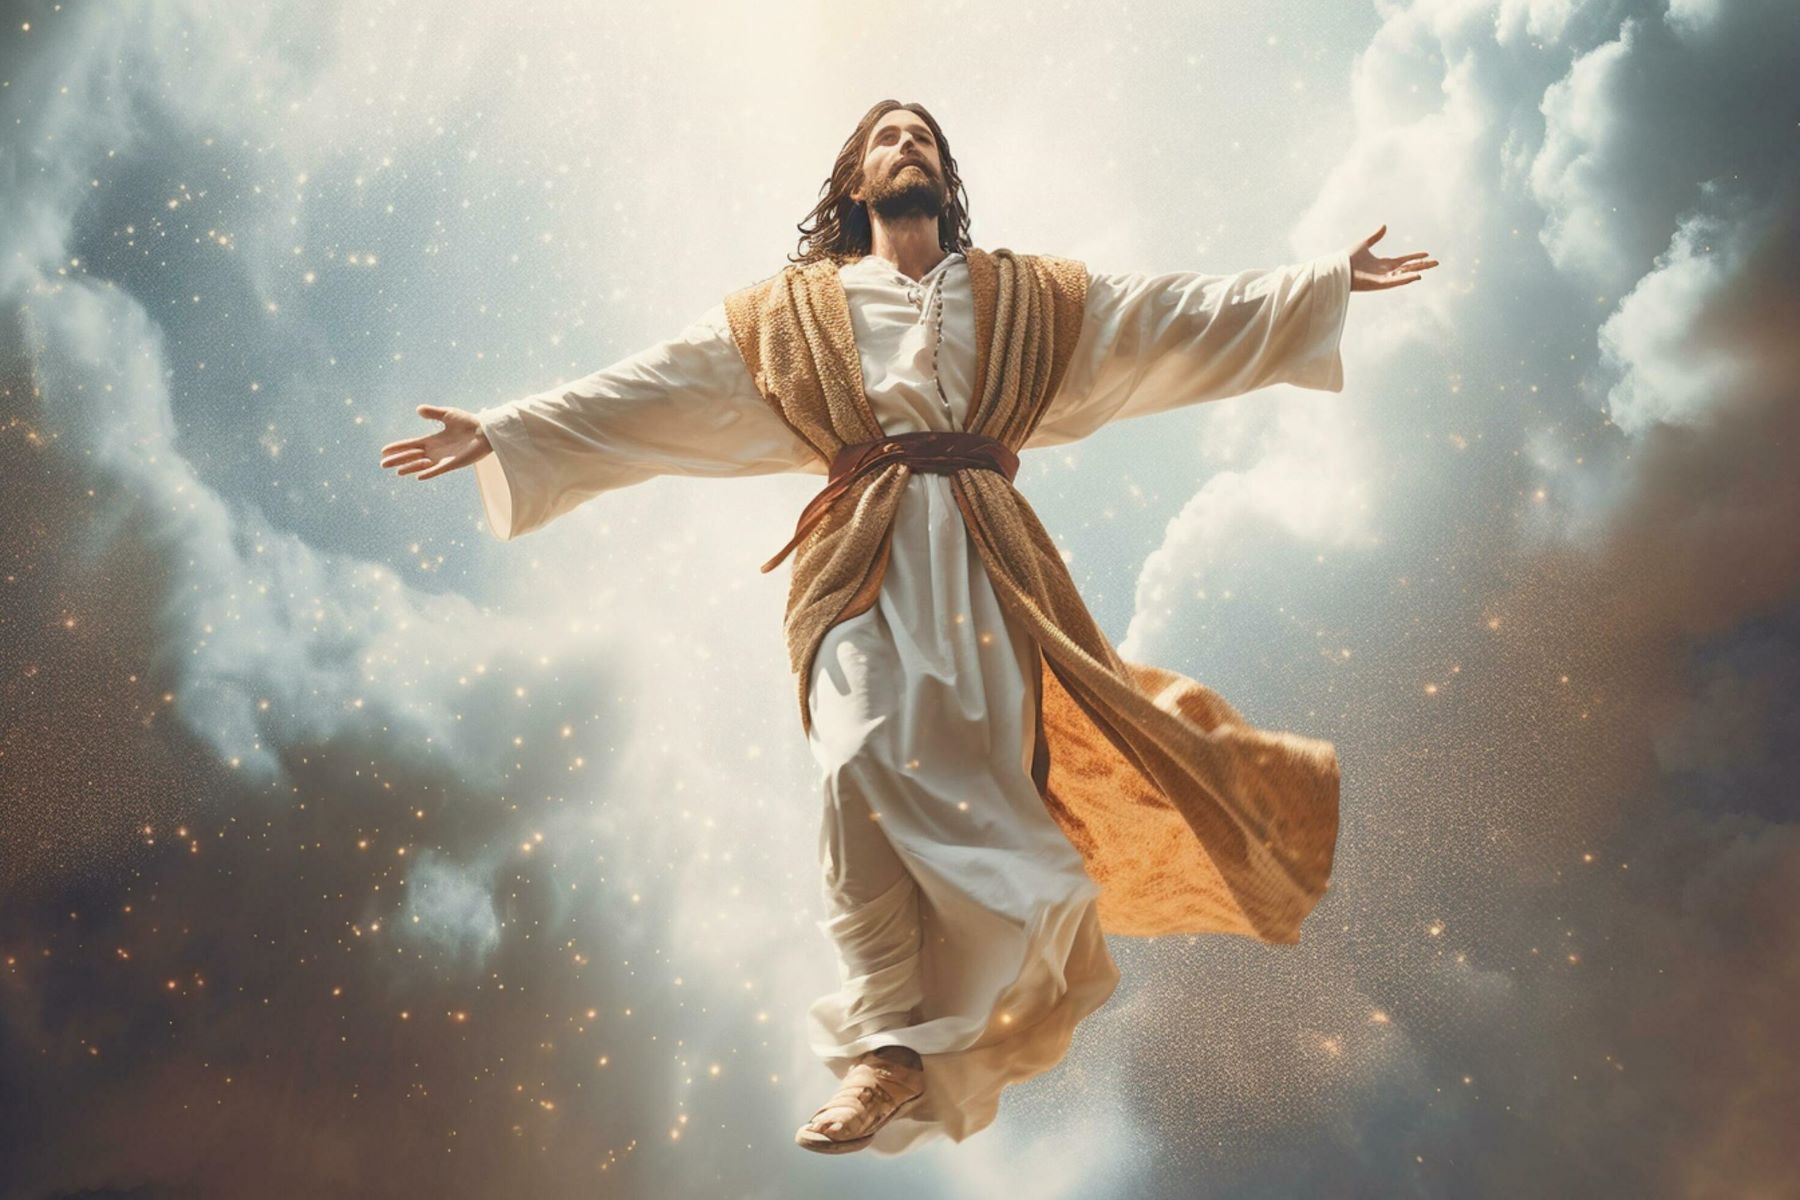 The Incredible Dream: Jesus' Embrace Transforms Everything